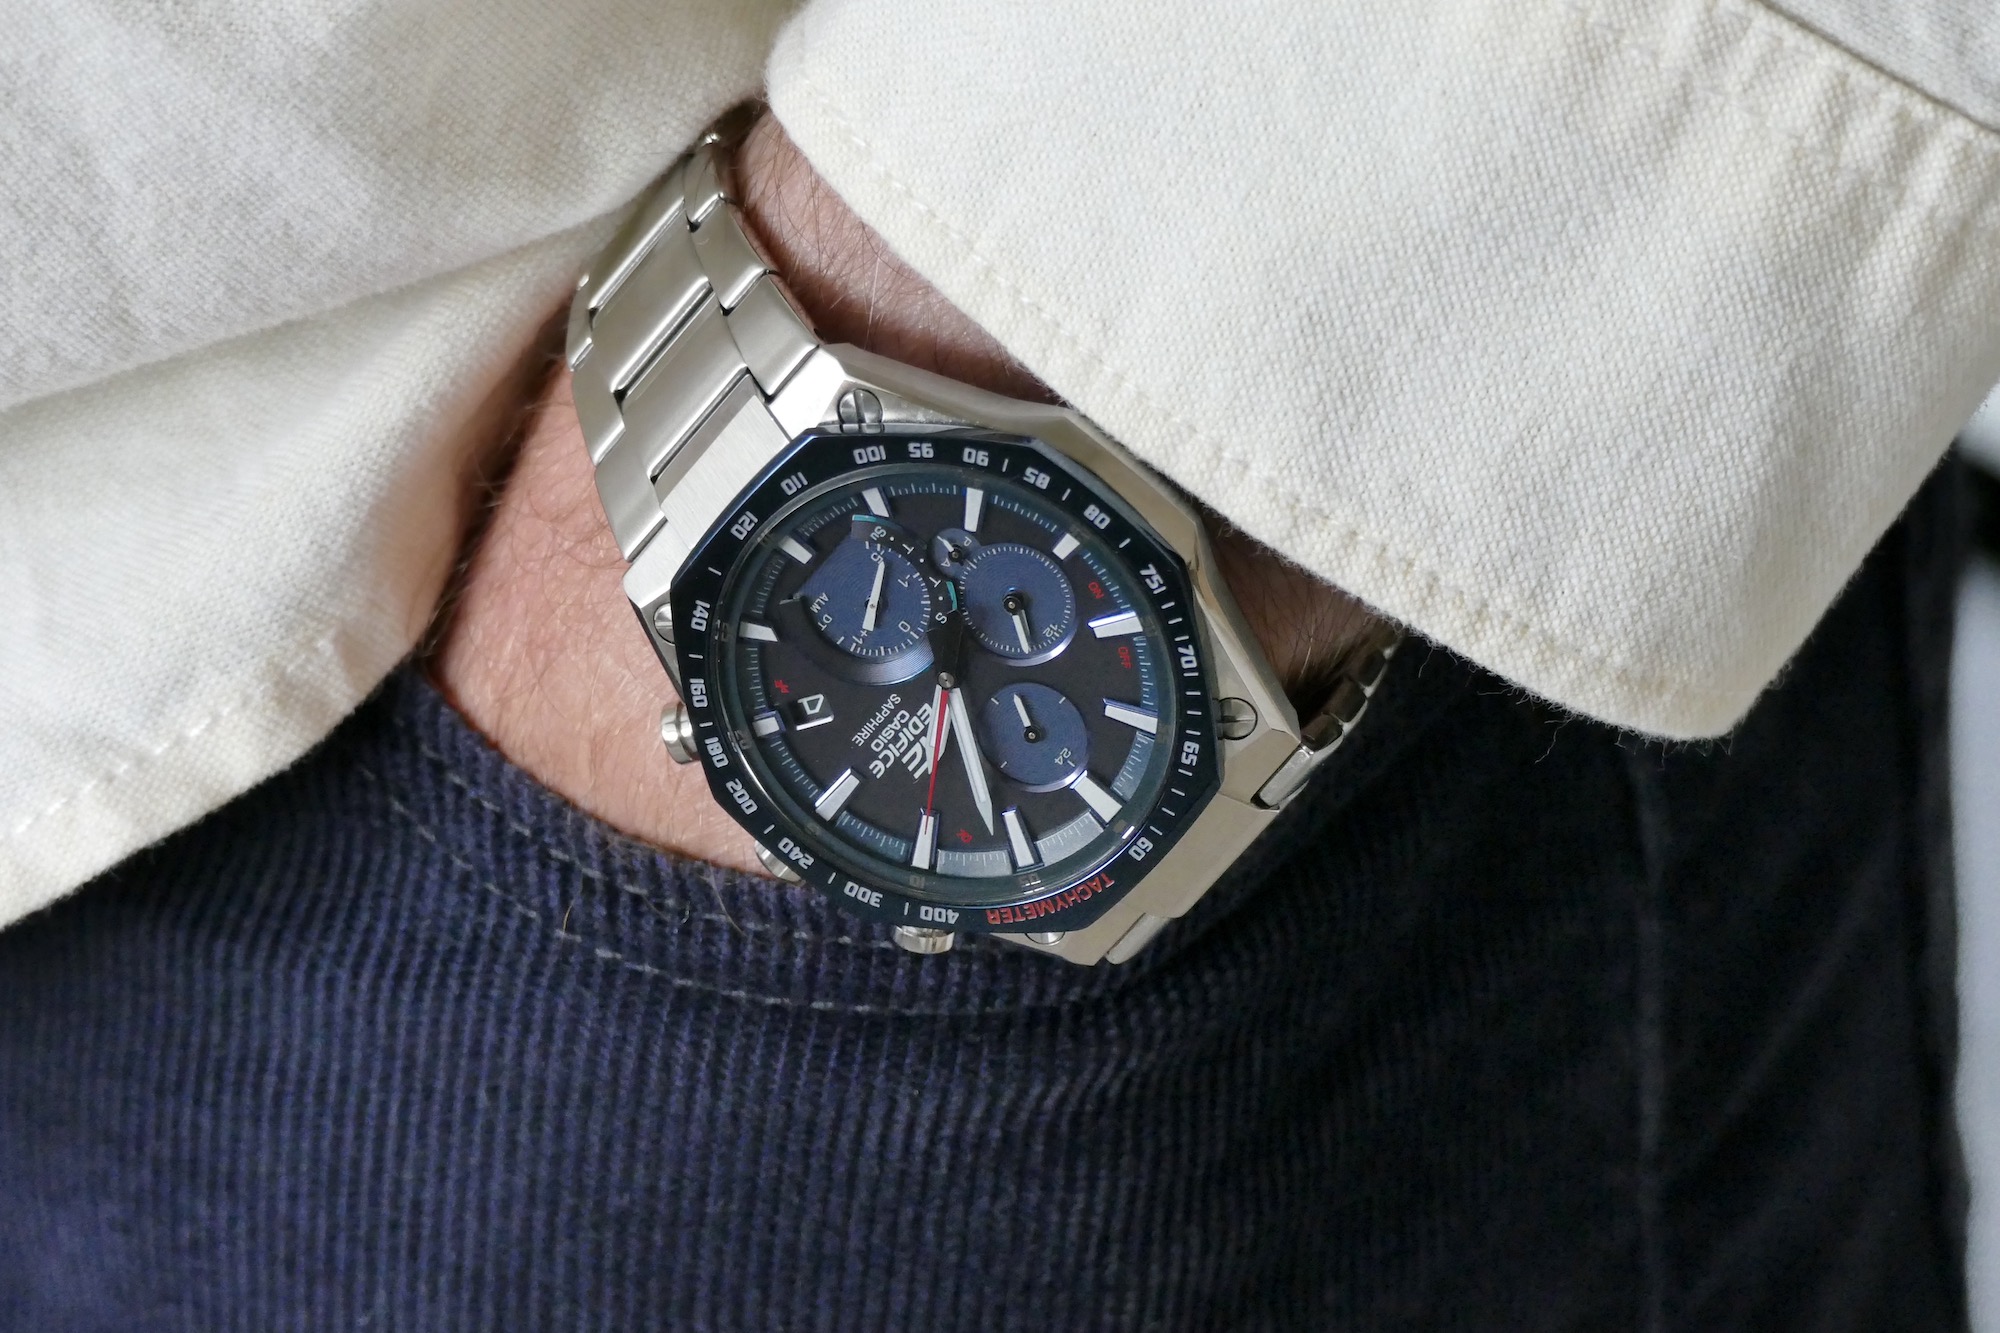 Casio Edifice EQB-1100 Has the Right Style, But the | Digital Trends